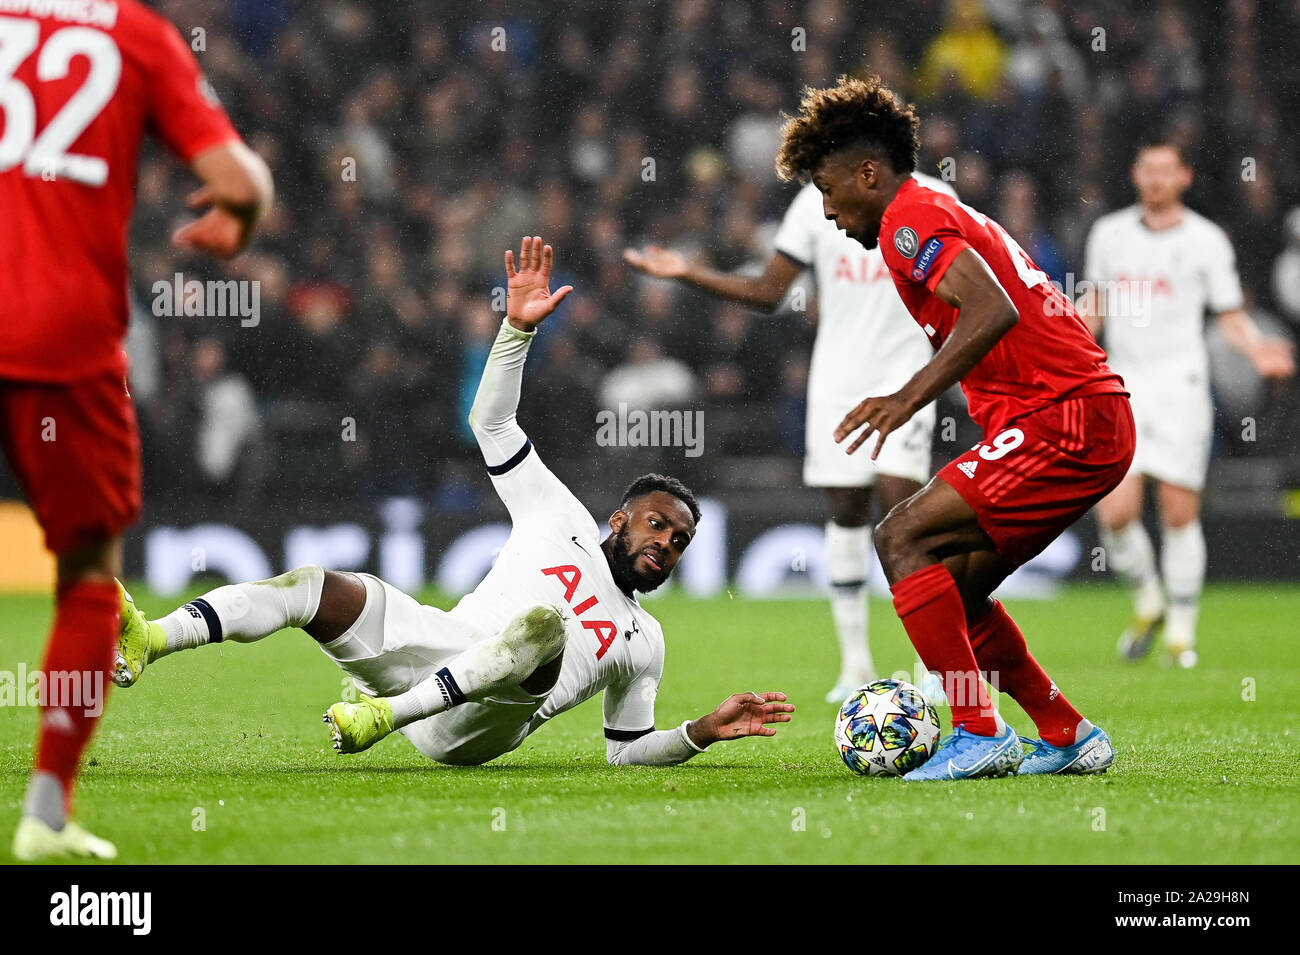 Danny Rose from Tottenham Hotspur (L) and Kingsley Coman from Bayern Munich (R) are seen in action during the UEFA Champions League (Group B) match between Tottenham Hotspur and Bayern Munich.(Final score; Tottenham Hotspur 2:7 Bayern Munich) Stock Photo